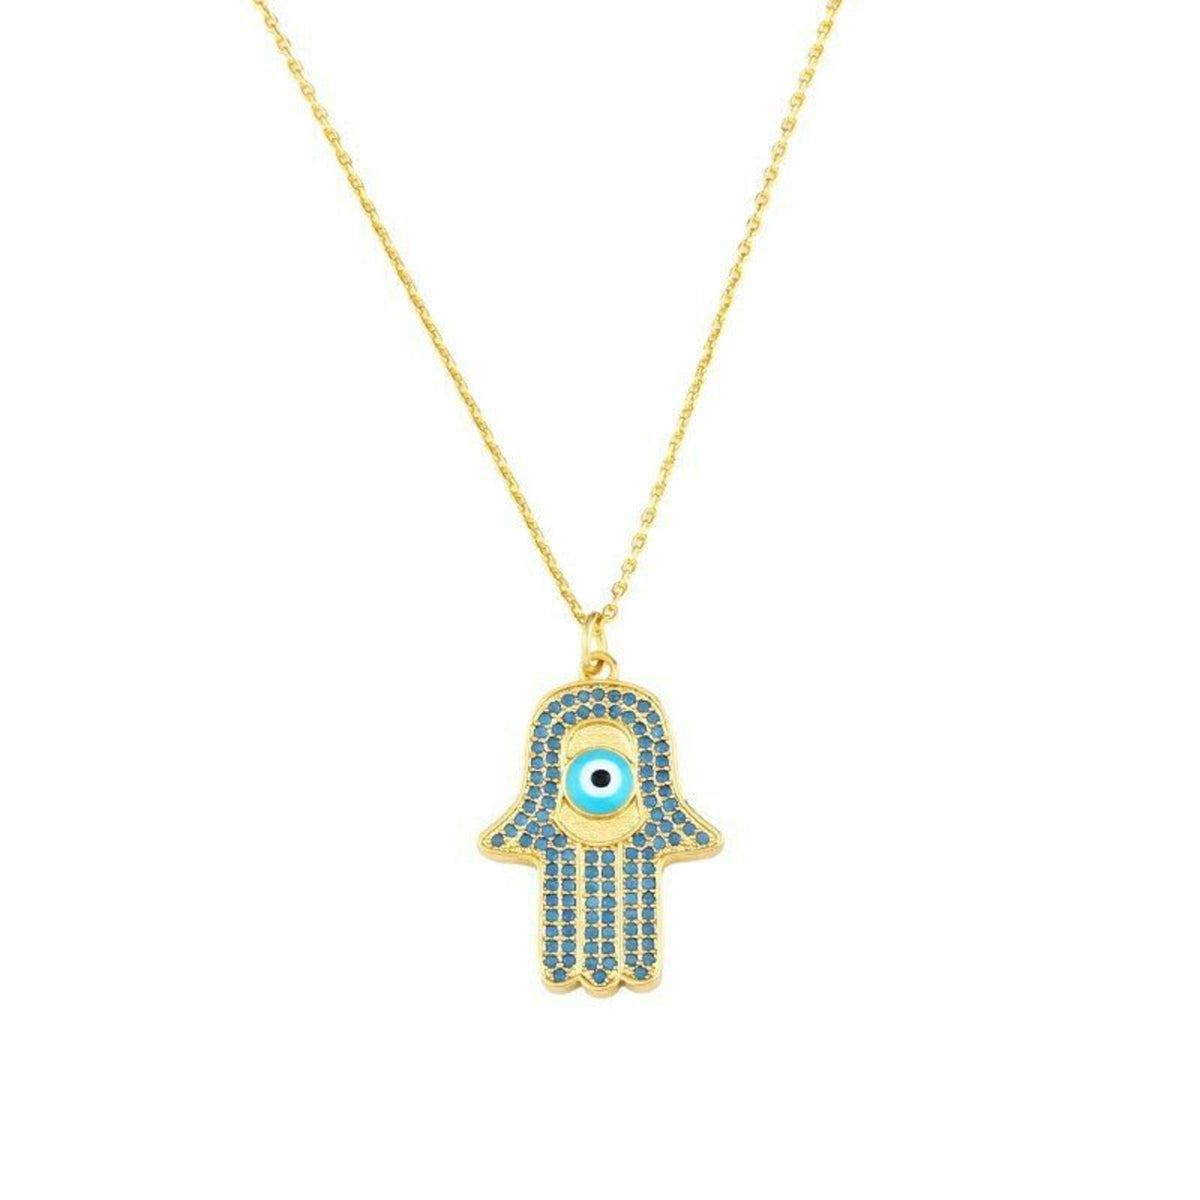 Luxe Time USA .925 Sterling Silver Gold Tone Hamsa Evil Eye Necklace Chain Pendant w/ Ext